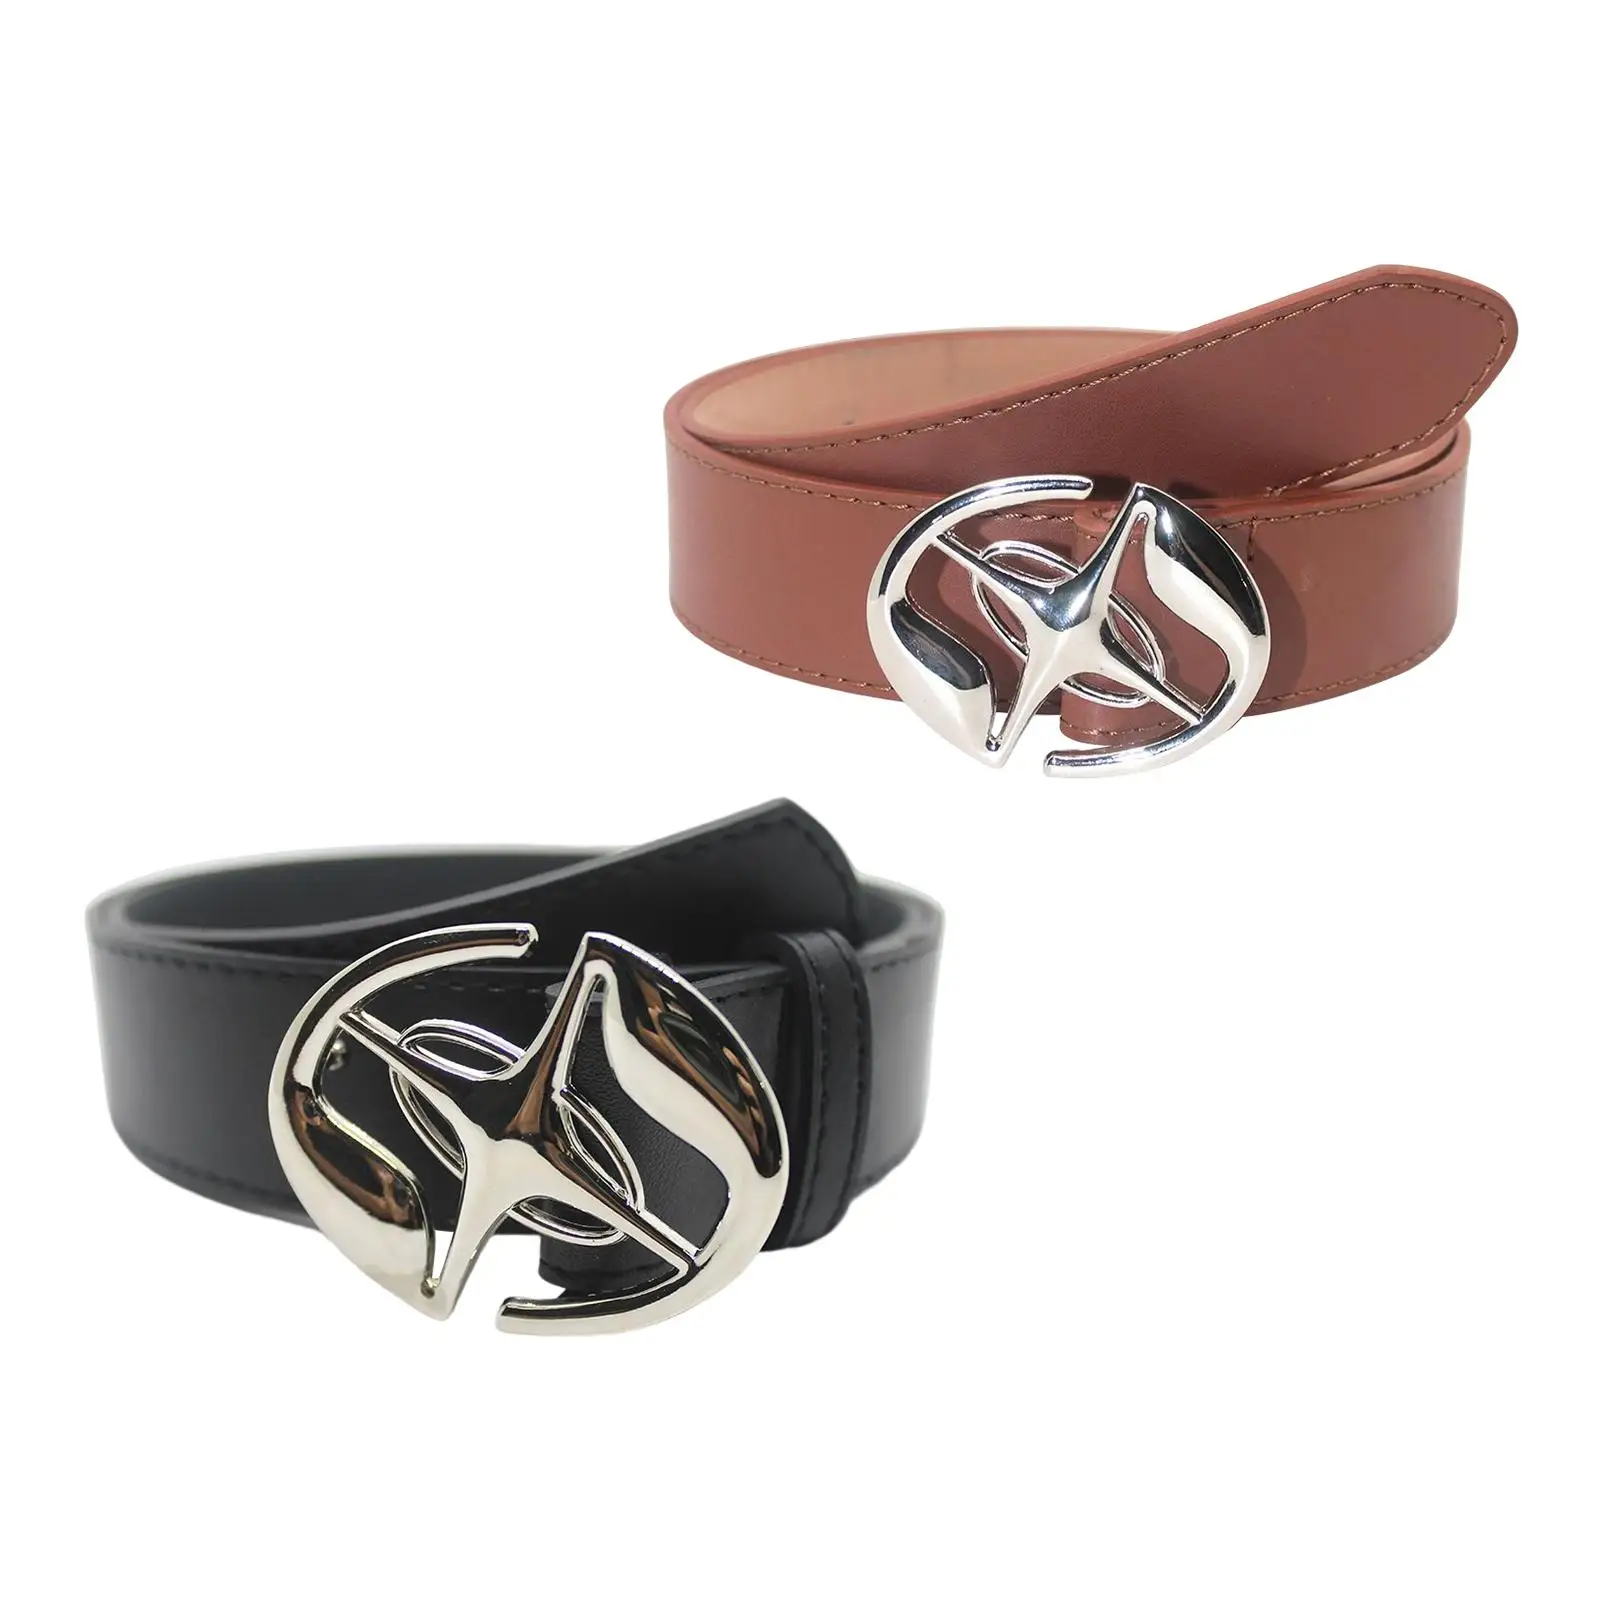 PU Leather Belt for Men Ladies Belts with Metal Pin Buckle Casual Dress Waist Belt Fashion Jeans Belt for Pants Work Outdoor